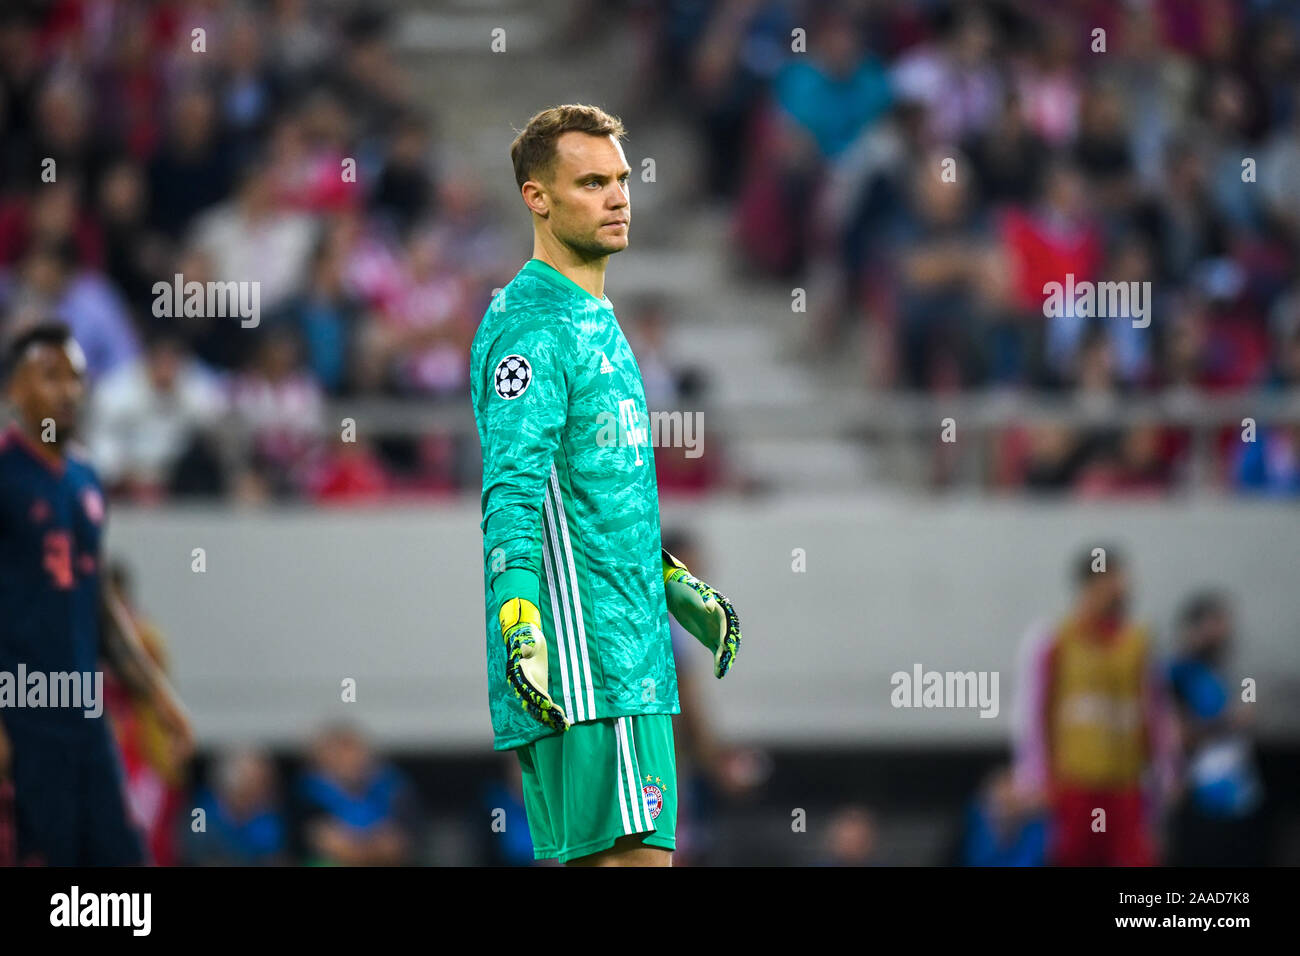 Piraeus, Greece - October 22, 2019: Goalkeeper of Bayern Manuel Neuer in  action during the UEFA Champions League game between Olympiacos vs Bayern  at Stock Photo - Alamy